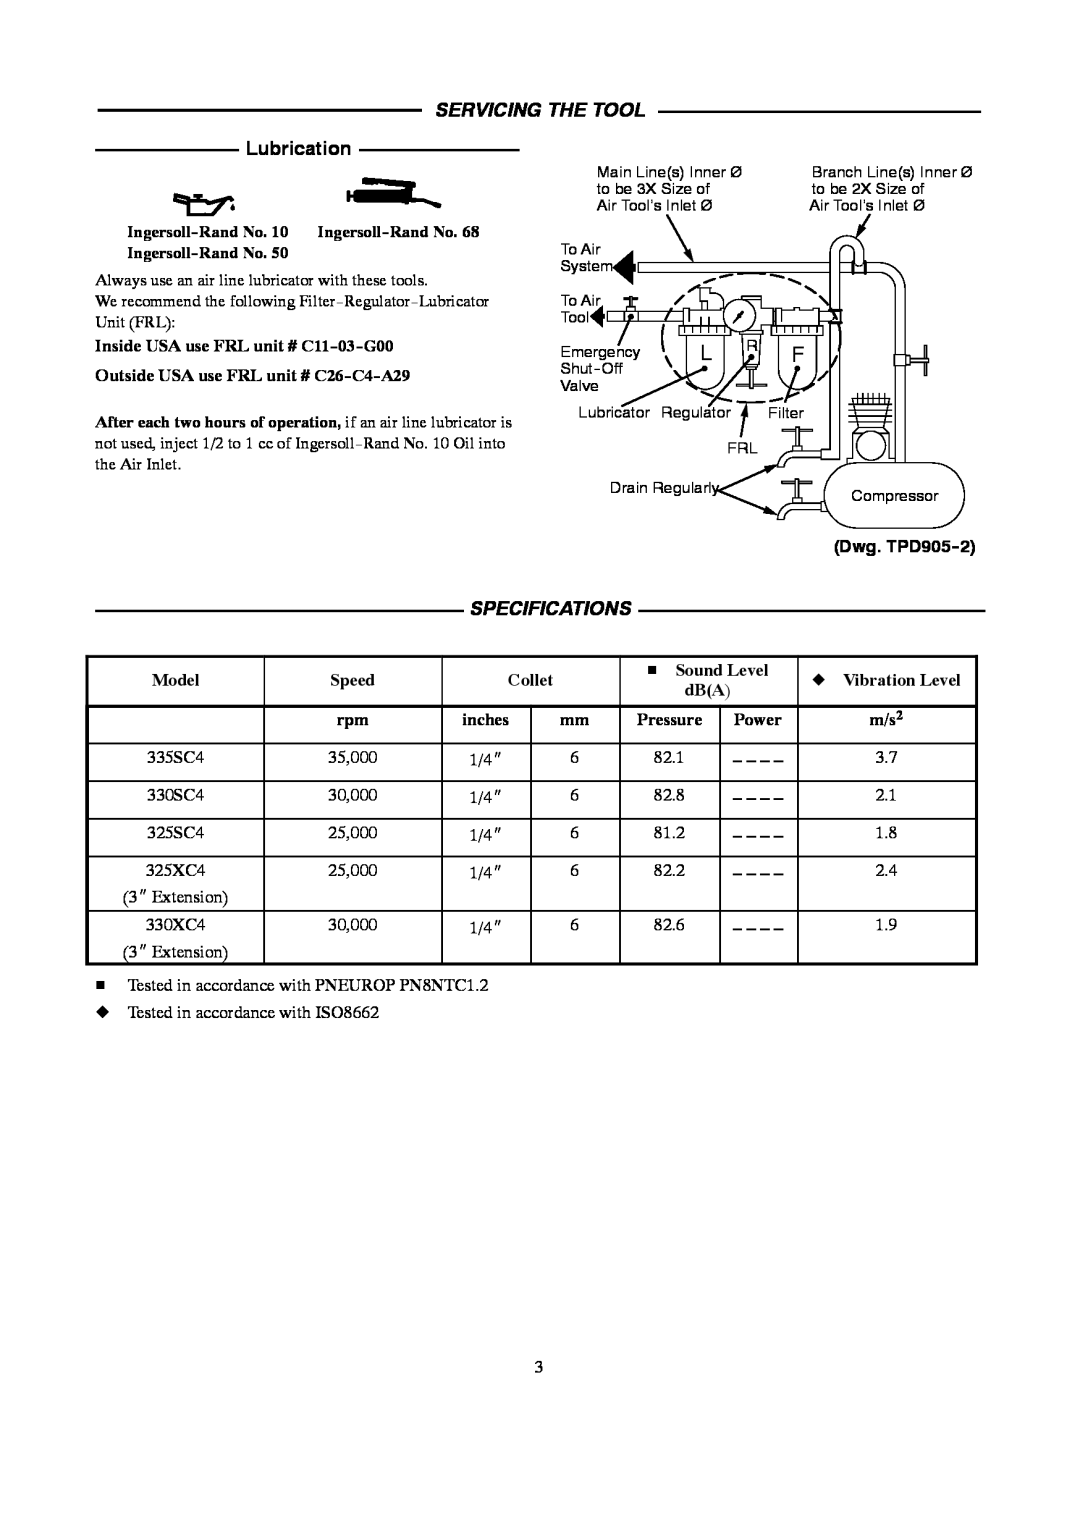 Ingersoll-Rand 4578217 manual Servicing The Tool, Lubrication, Specifications, Dwg. TPD905-2 